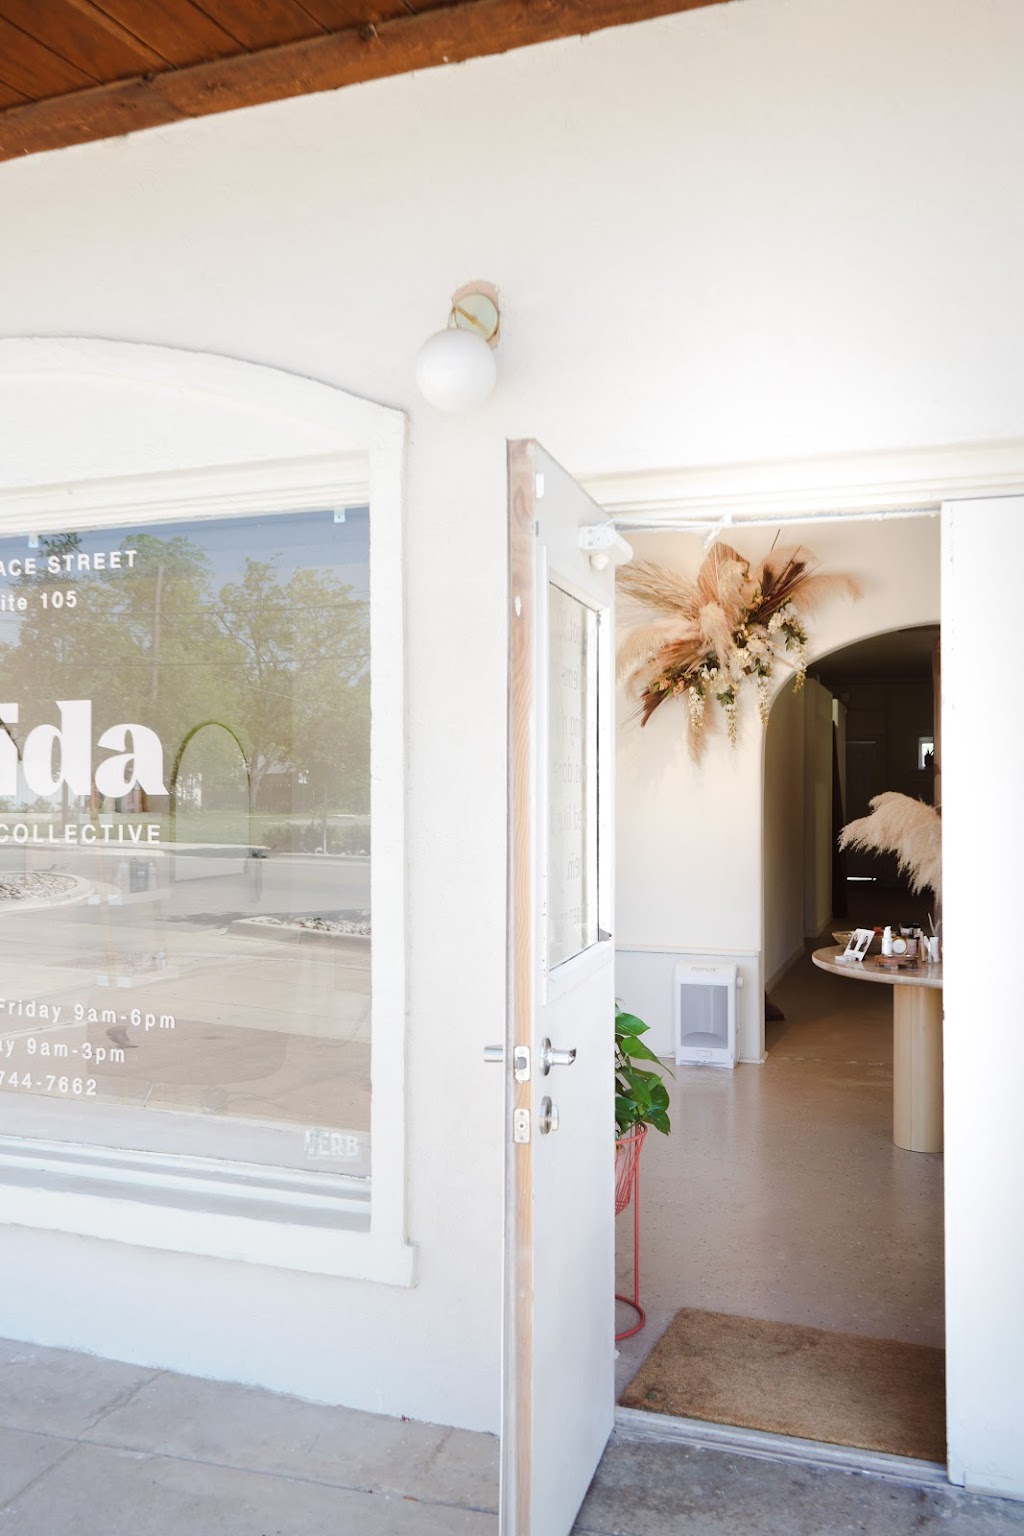 Frida Beauty Collective | 2707 Race St #105, Fort Worth, TX 76111 | Phone: (682) 683-7899